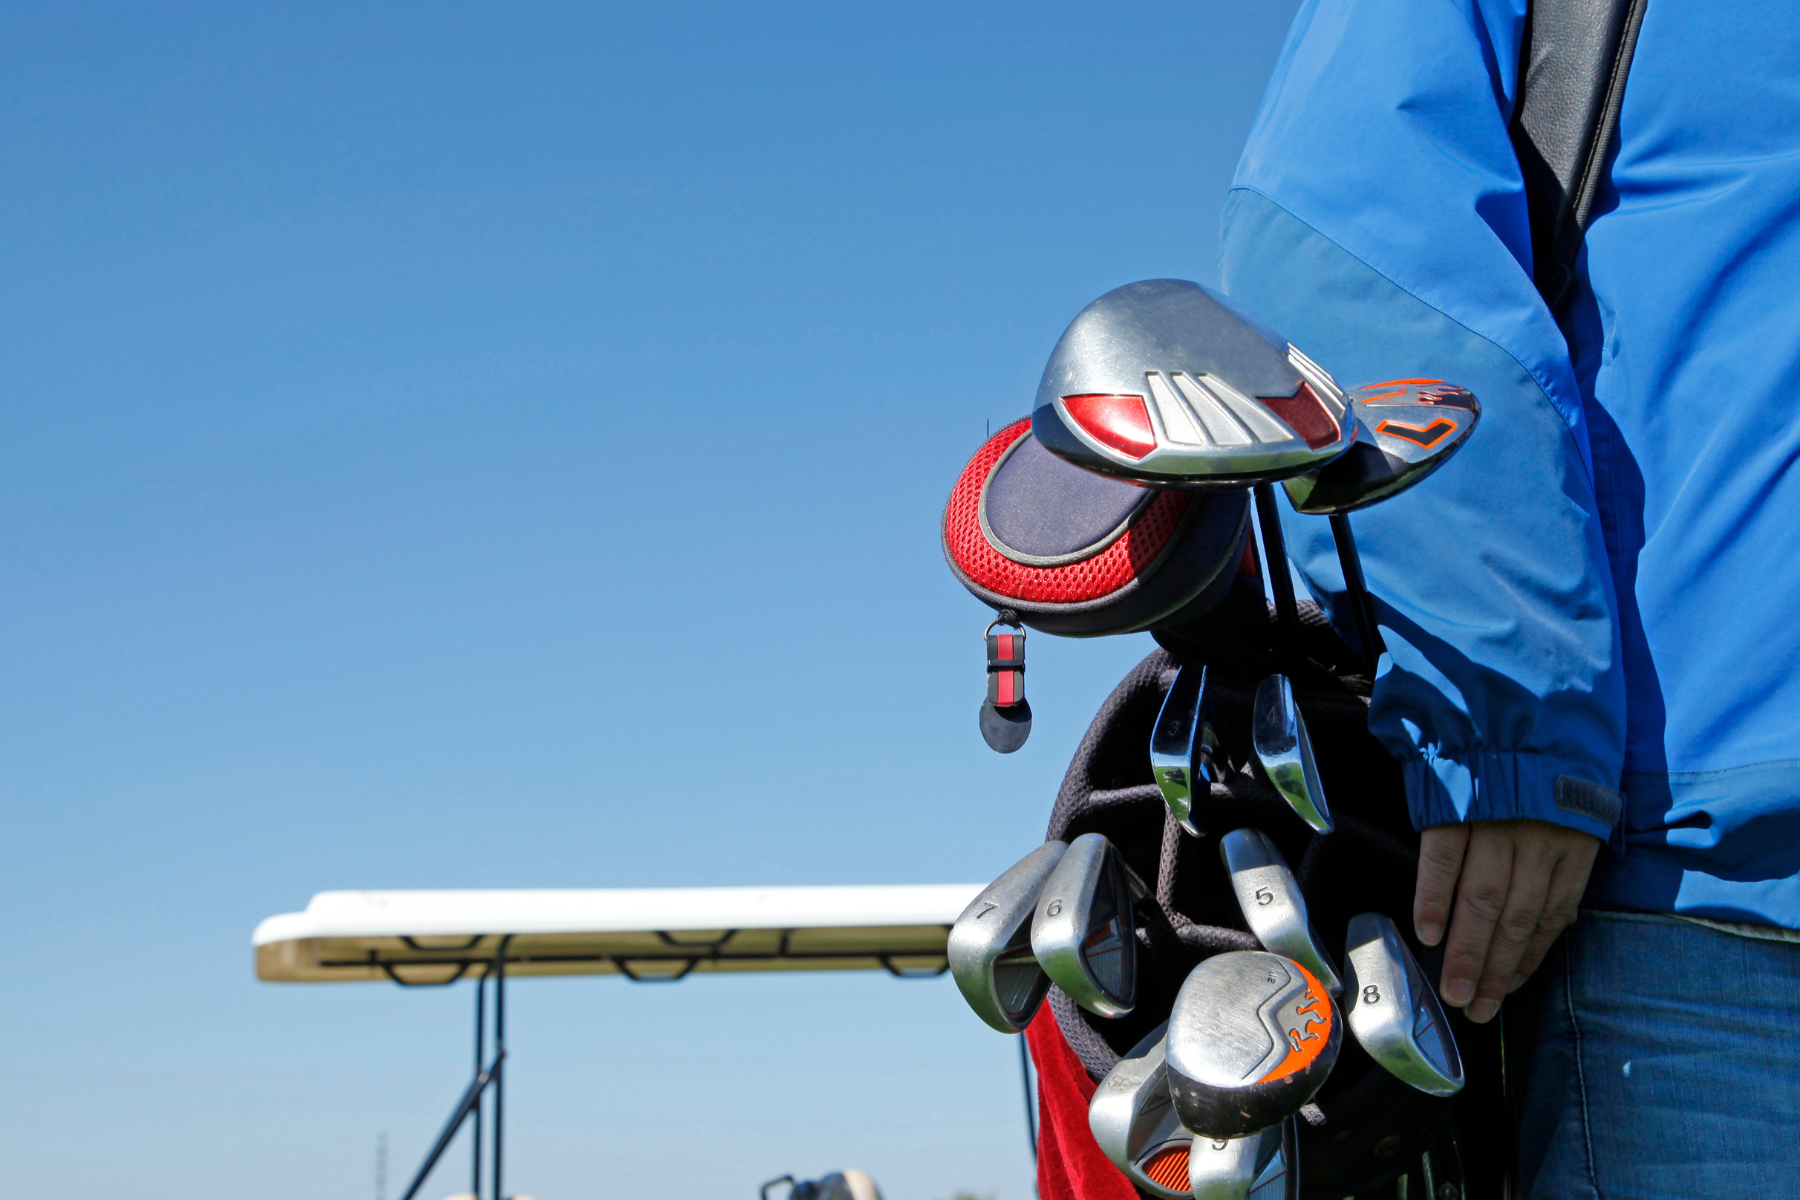 Best Golf Clubs and Sets For Beginners